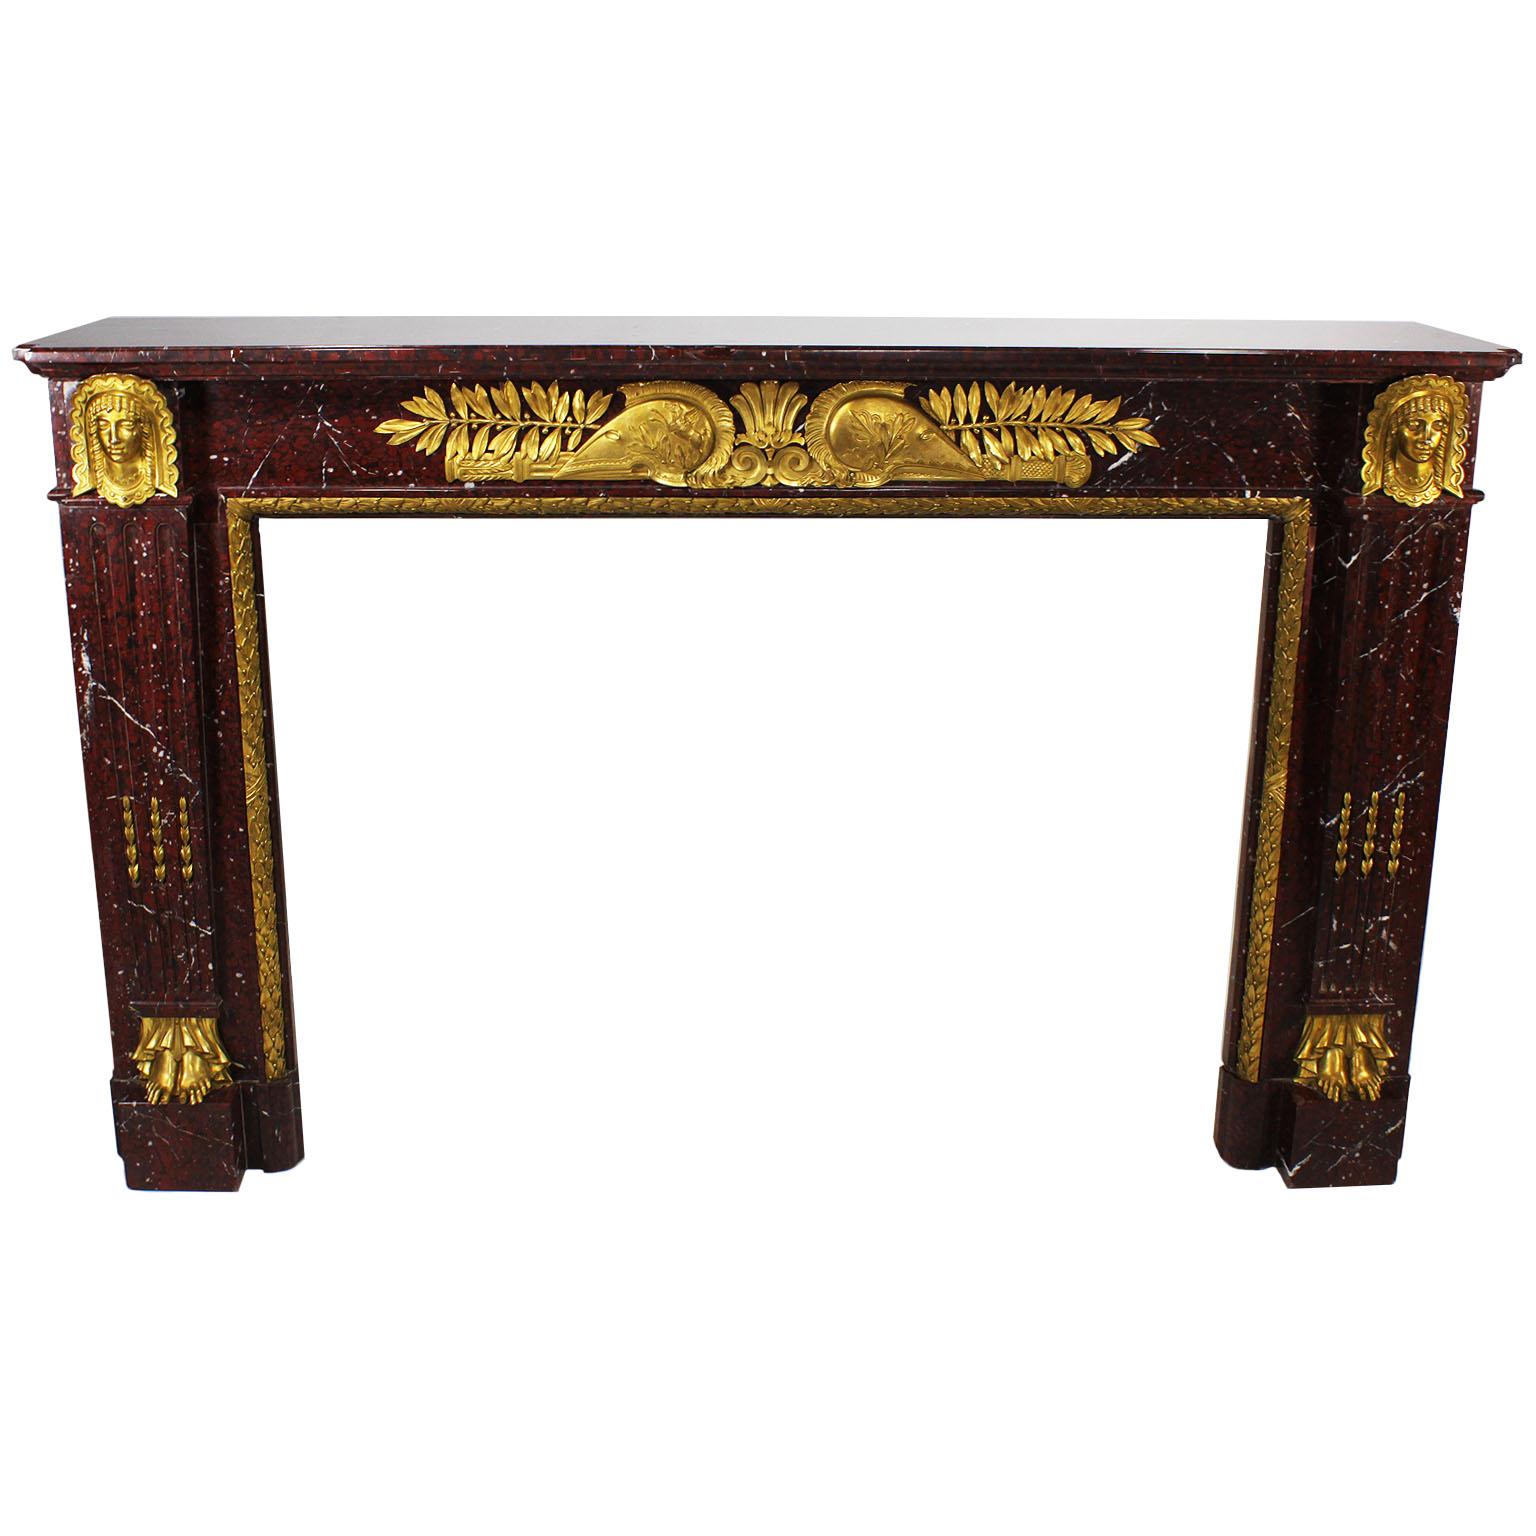 Important French Napoleon III carved Rouge Griotte Marble and ormolu mounted figural fireplace mantel chimneypiece. The rectangular carved marble body surmounted with ormolu mounts of masks of maidens above wreaths and their bare feet, with a floral